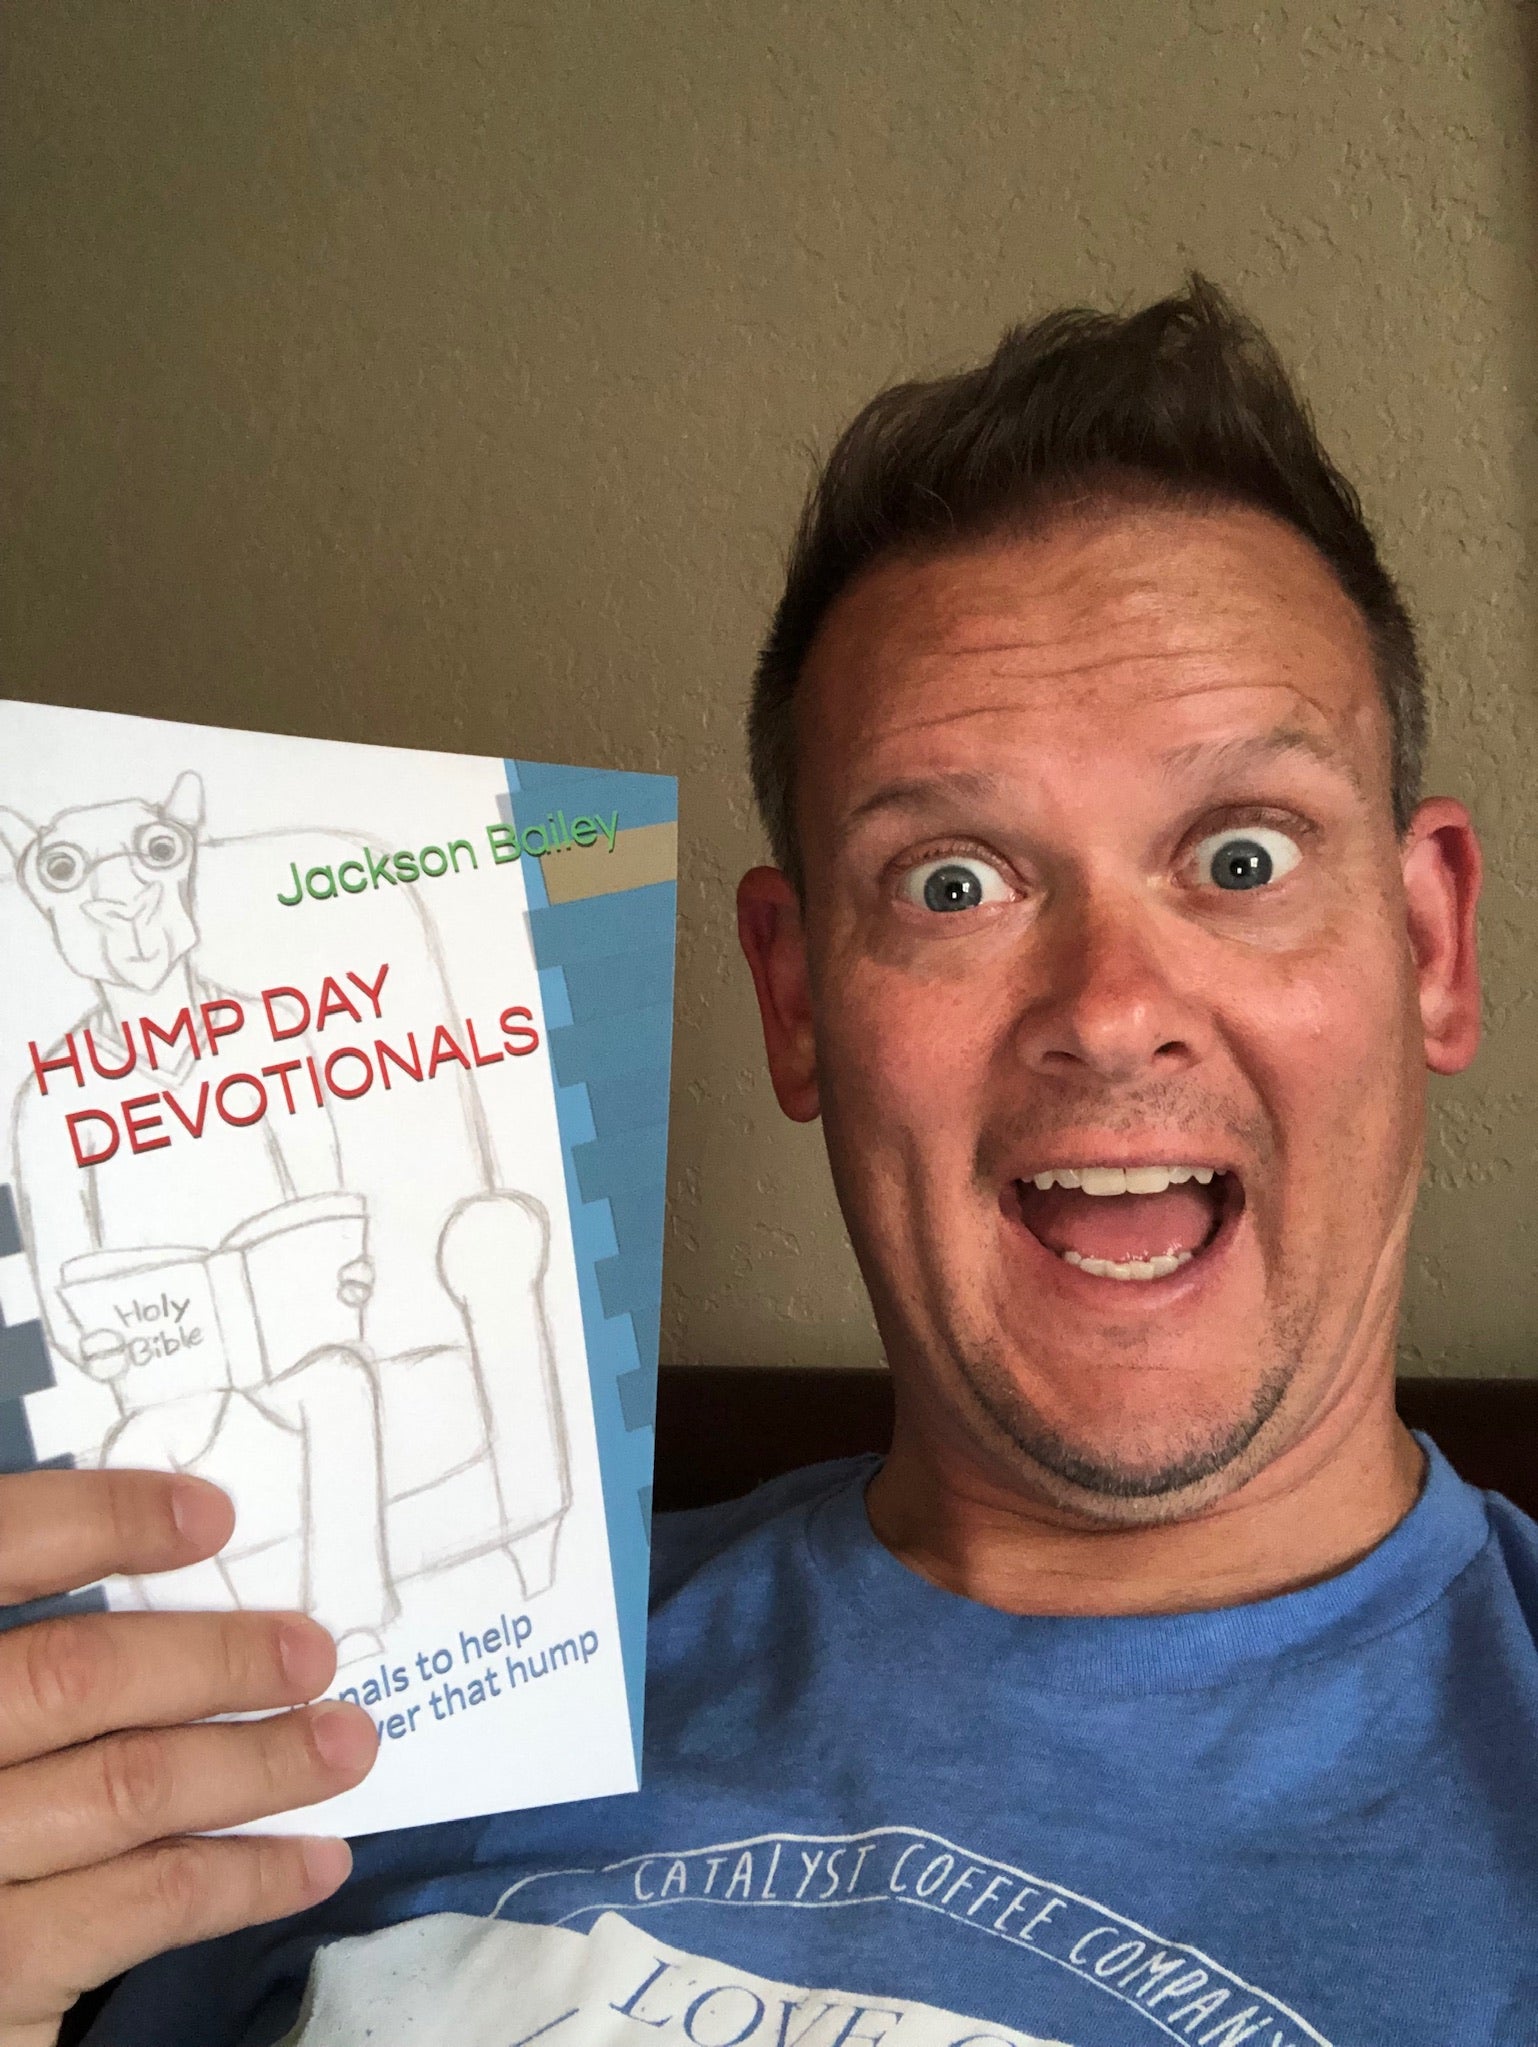 Jackson Bailey's new 332-page devotional book is full of 52 personal (and hilarious) stories to help you and your family "get over the hump" in your journey with Christ!